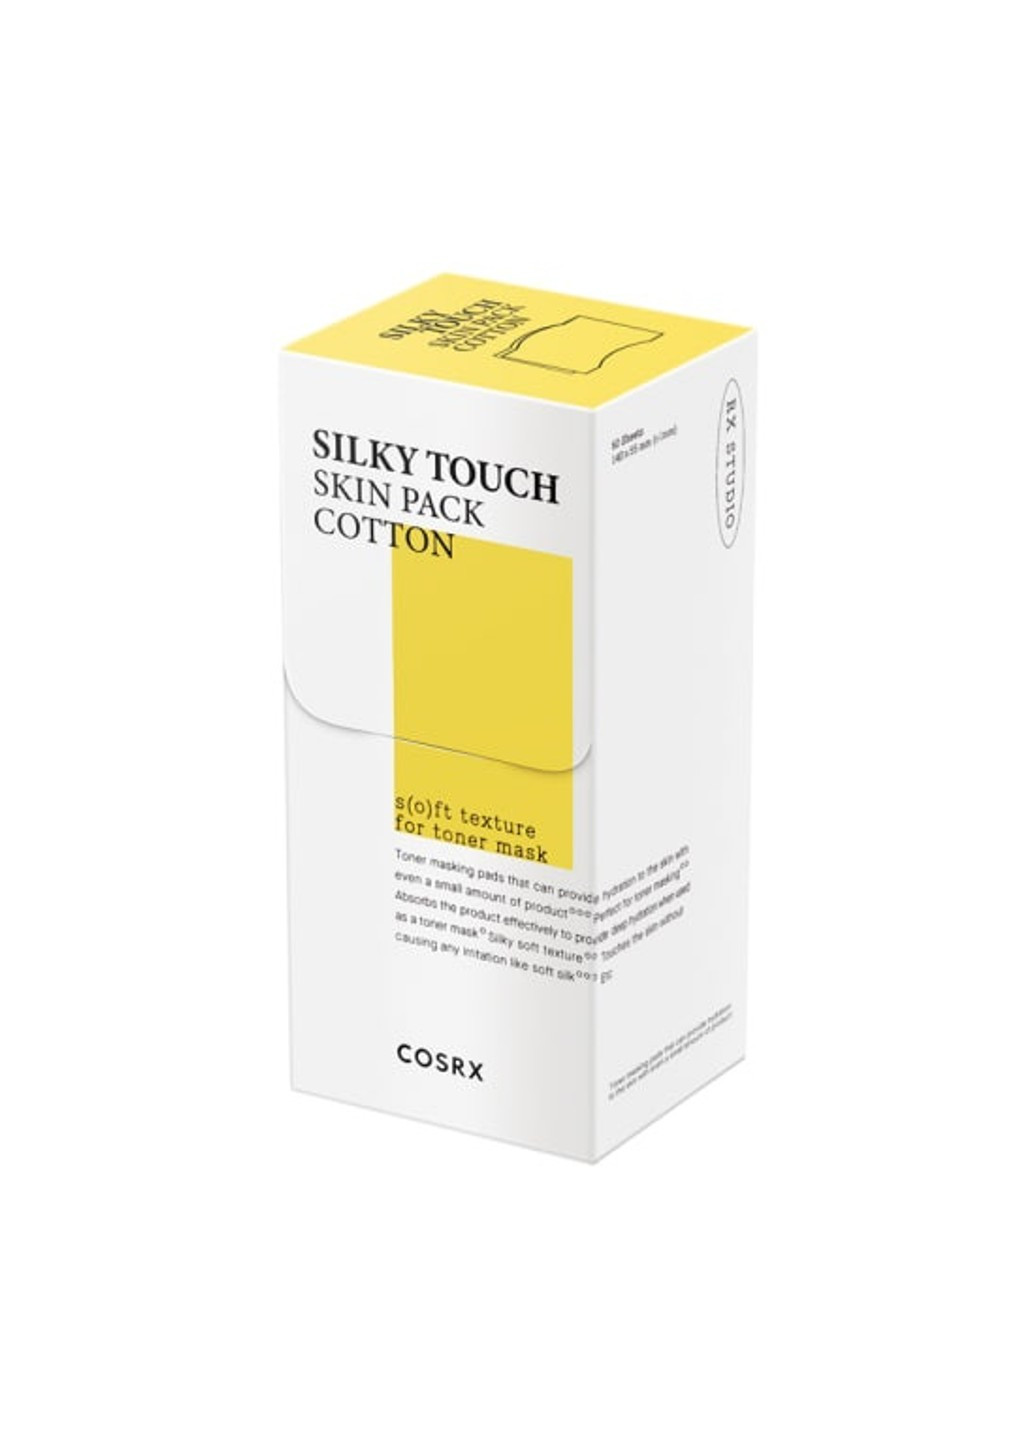 Диски для лица Silky Touch Skin Pack Cotton 60 шт COSRX (260635914)